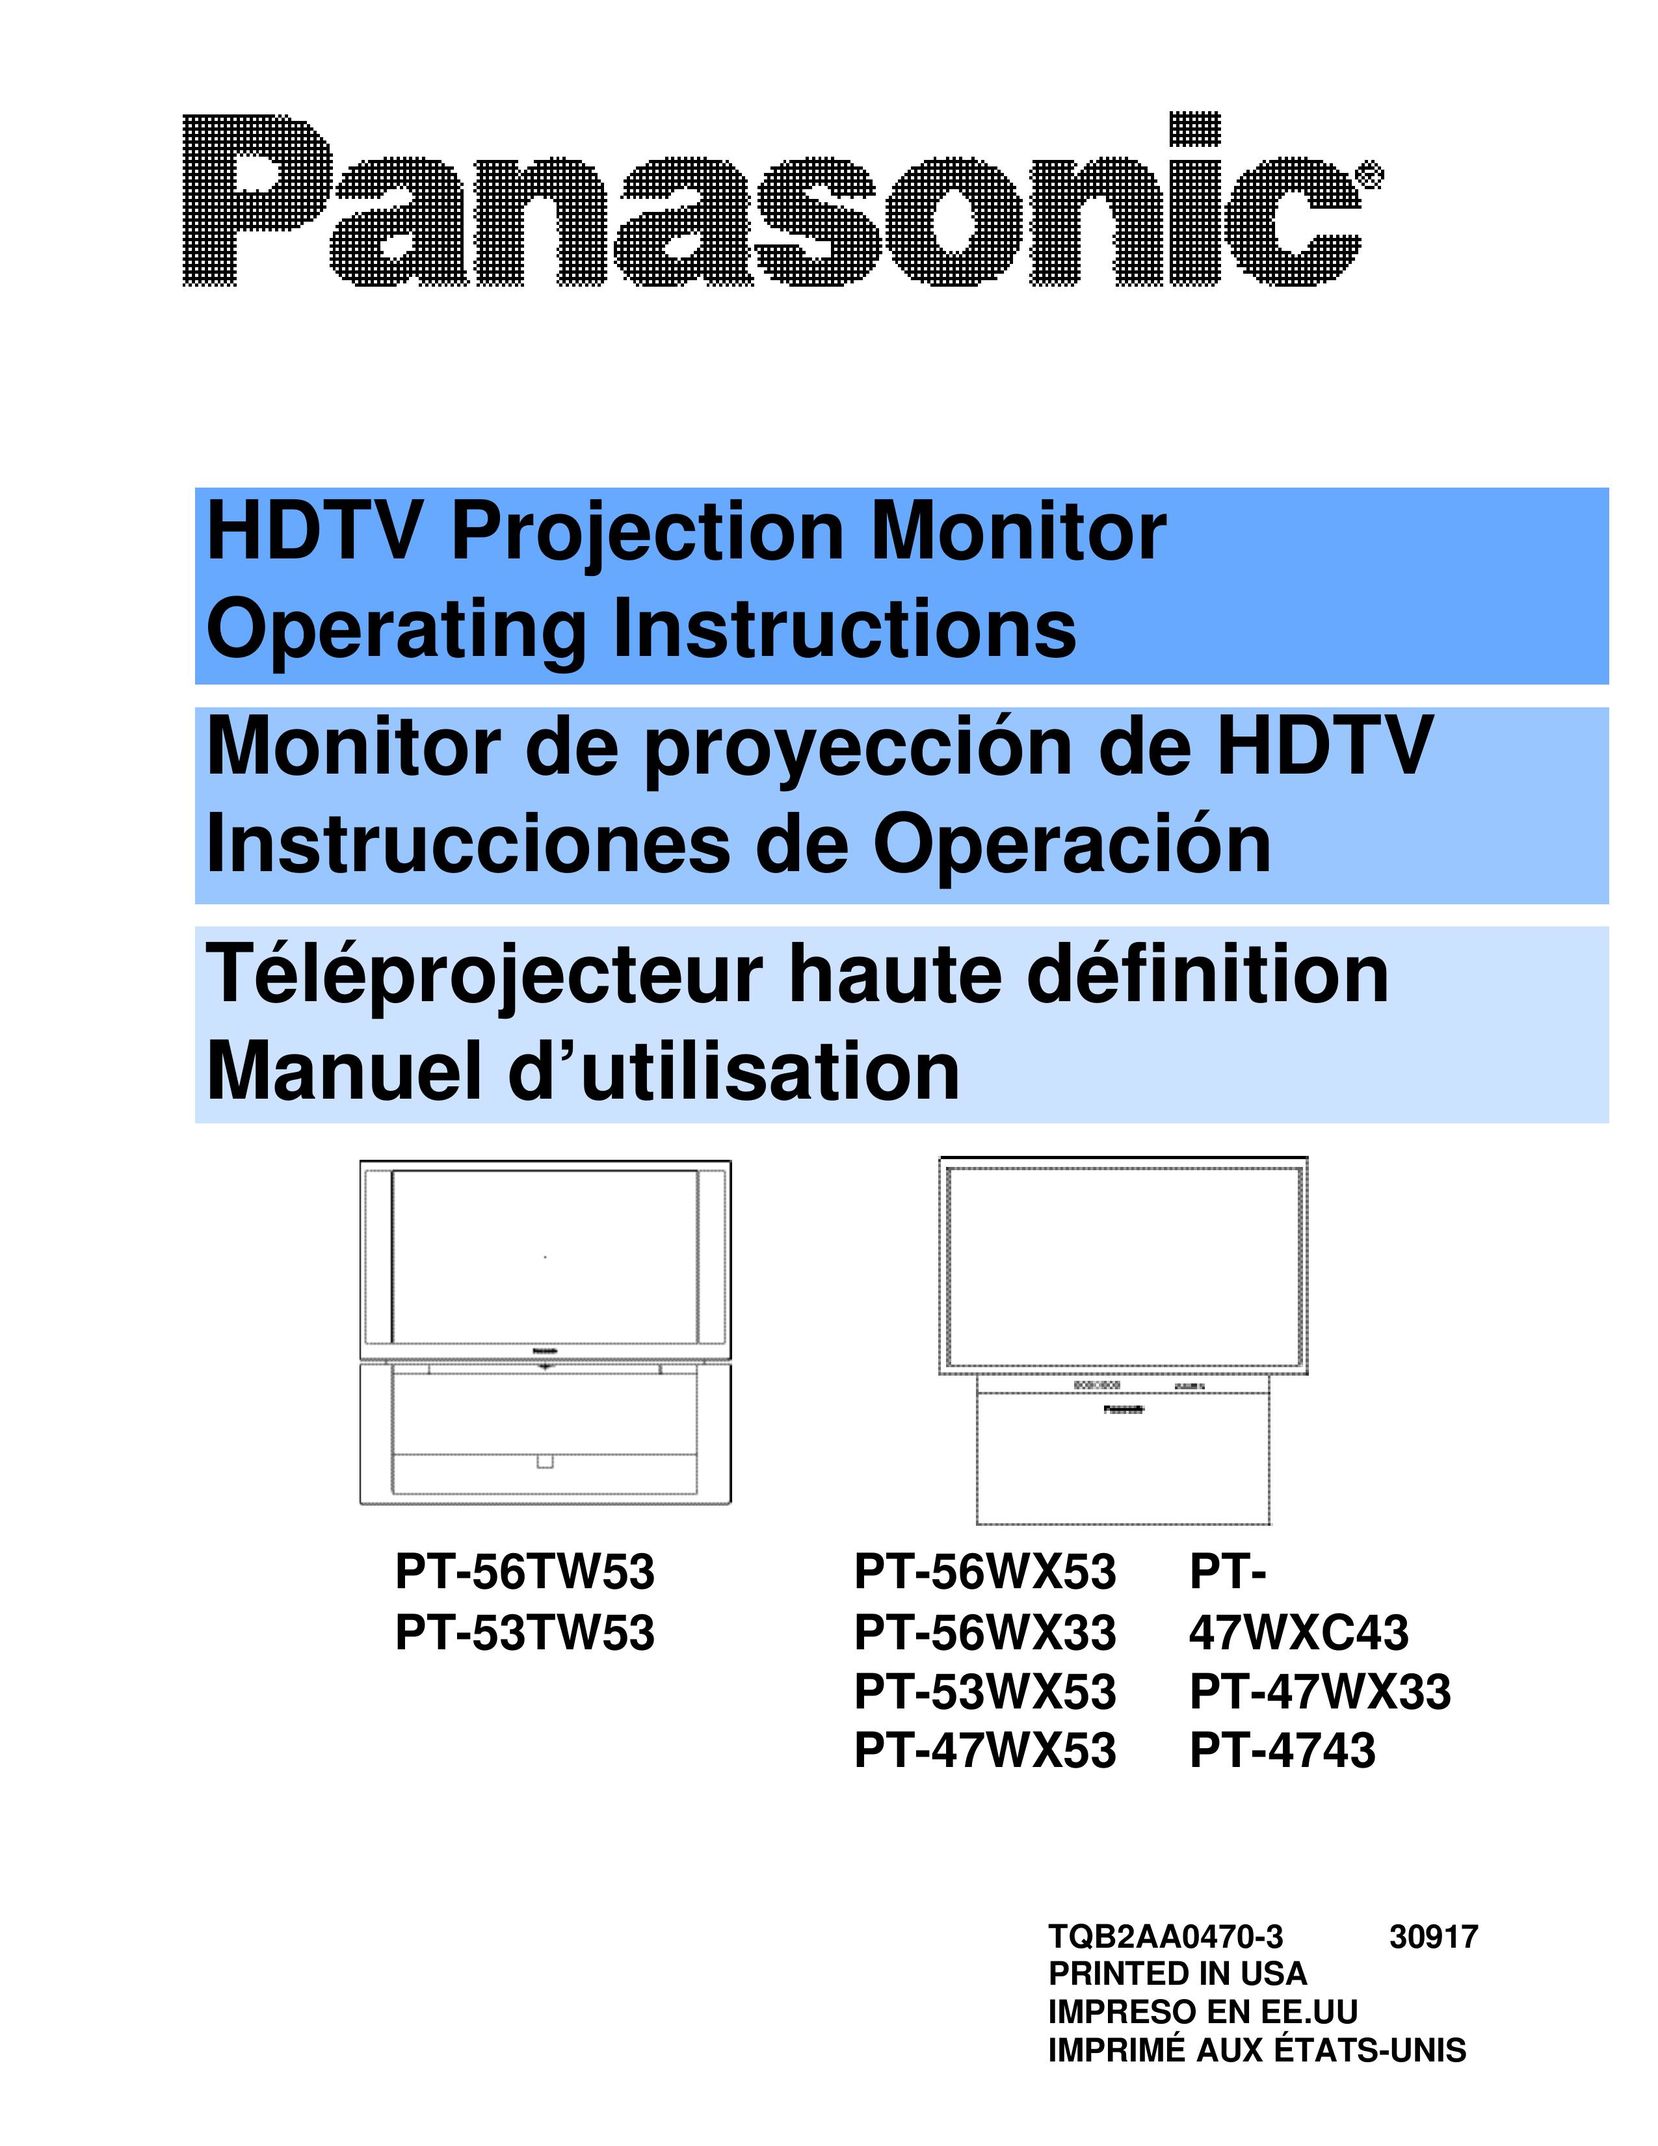 Panasonic PT 47WX53 Projection Television User Manual